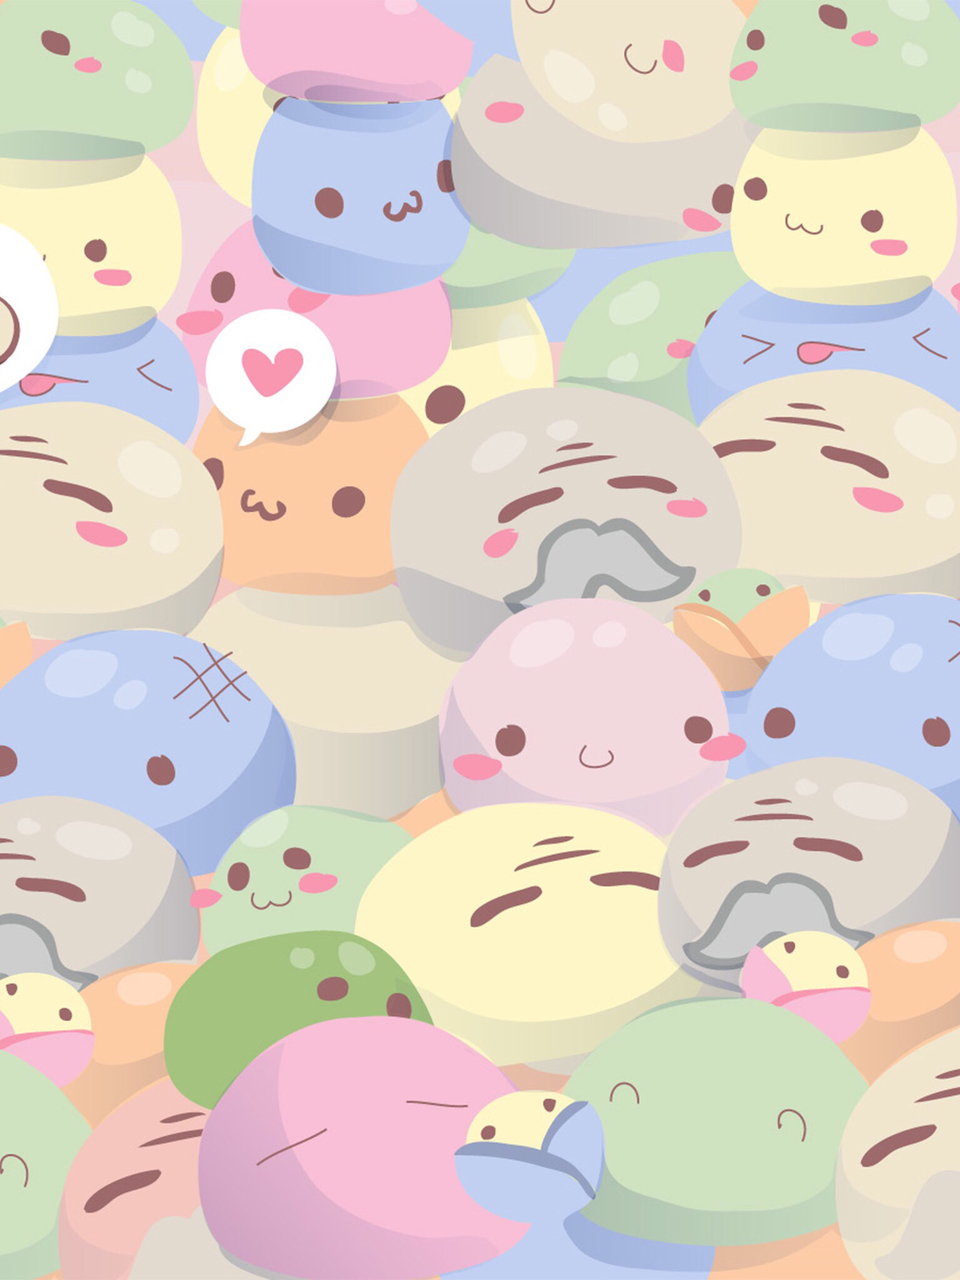 Free download Image about kawaii in Cutsie Wallpapers by Tiffany ...